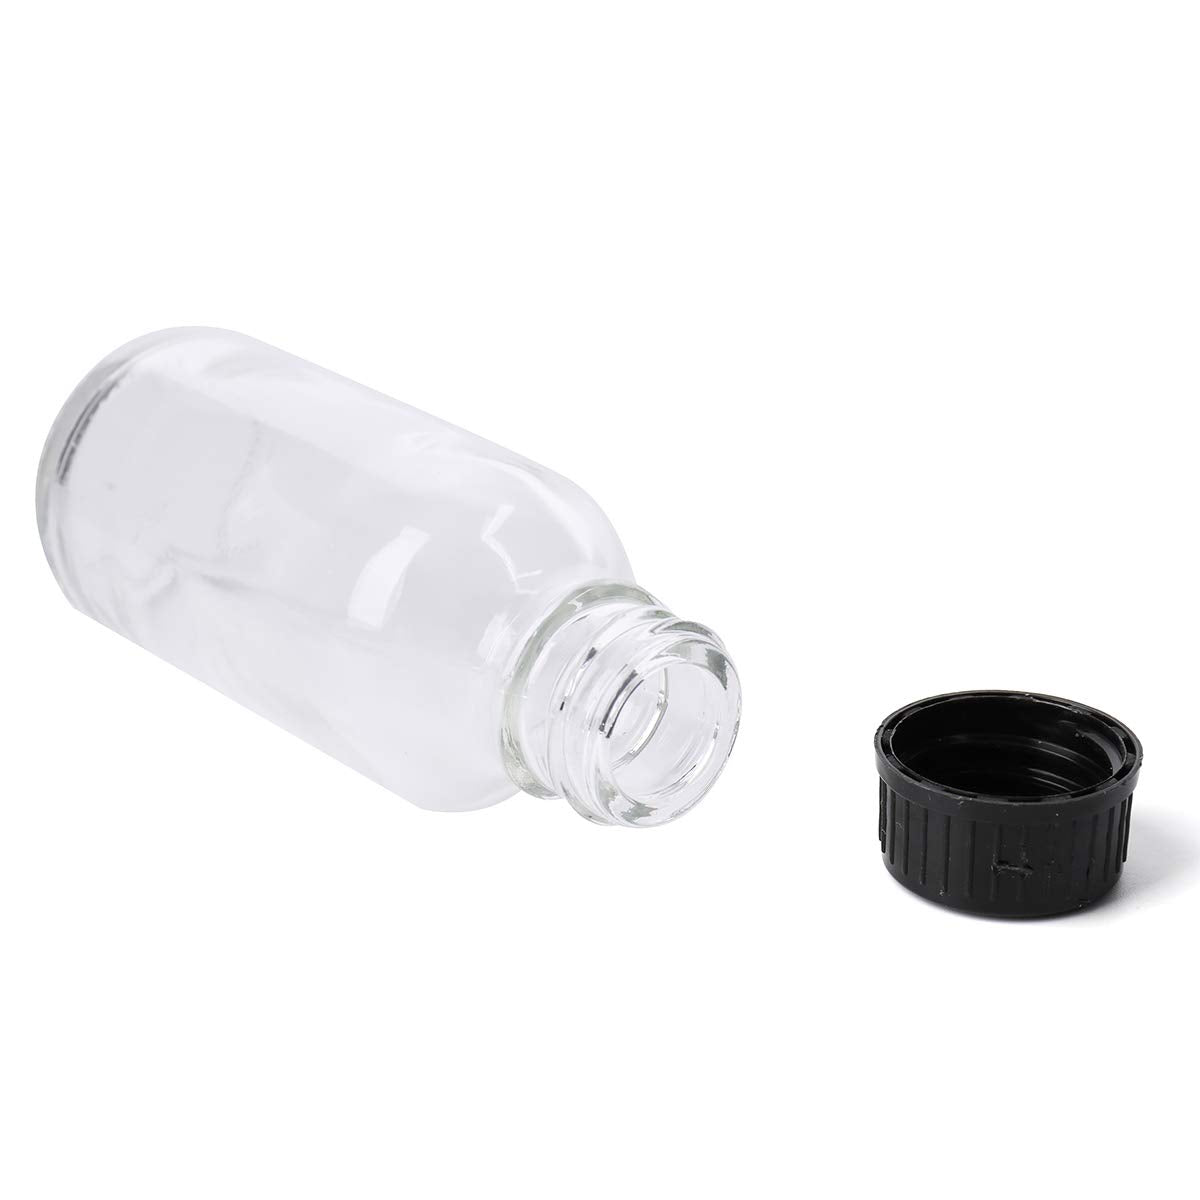 Bekith 30 Pack Boston Round Glass Bottle with Black Cap, 1 oz Capacity, Clear